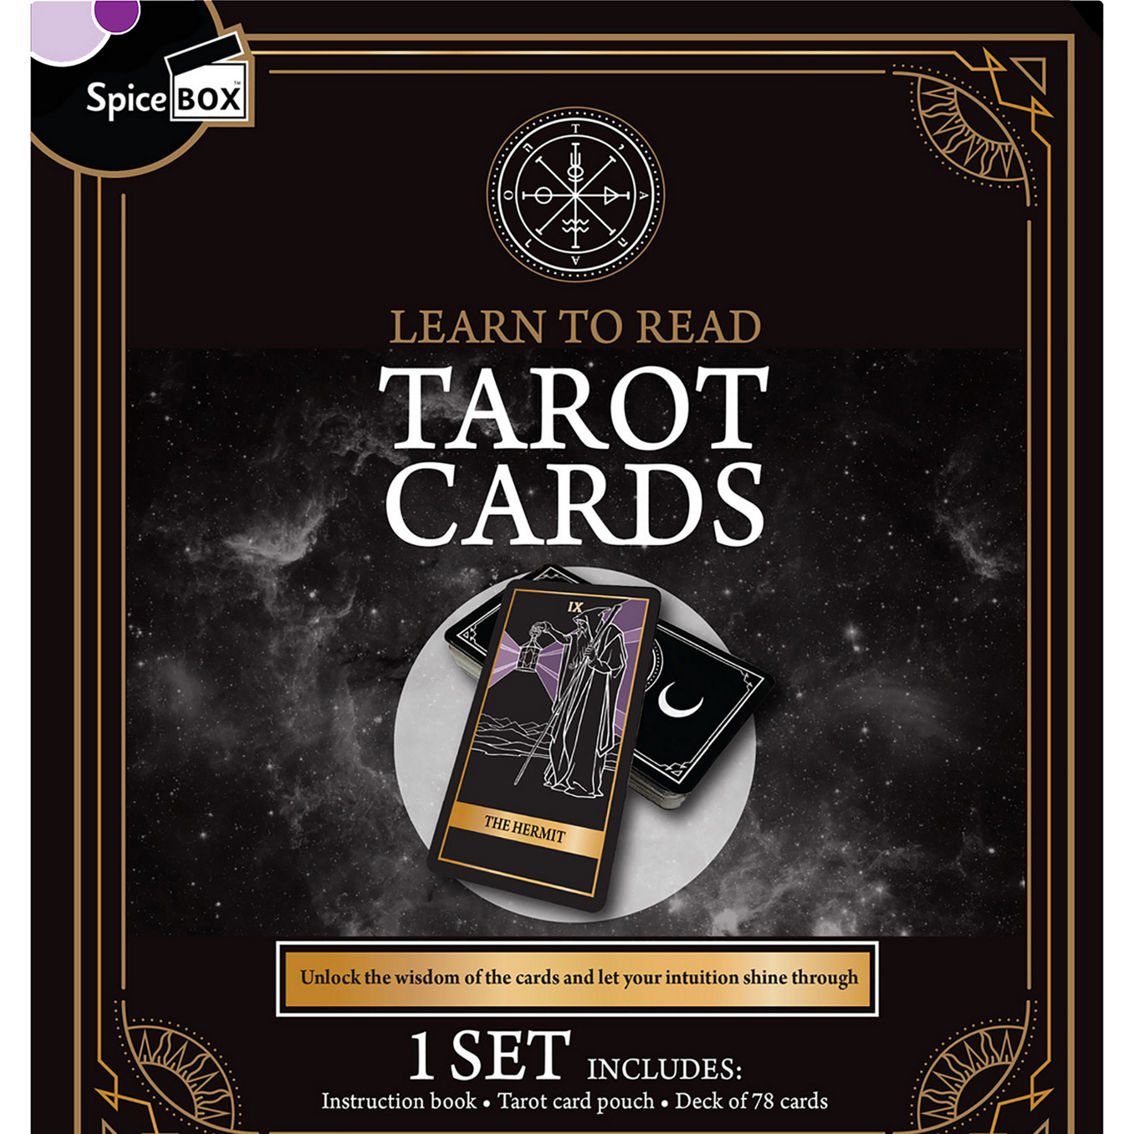 SpiceBox Gift Box: Tarot Cards - Image 7 of 7